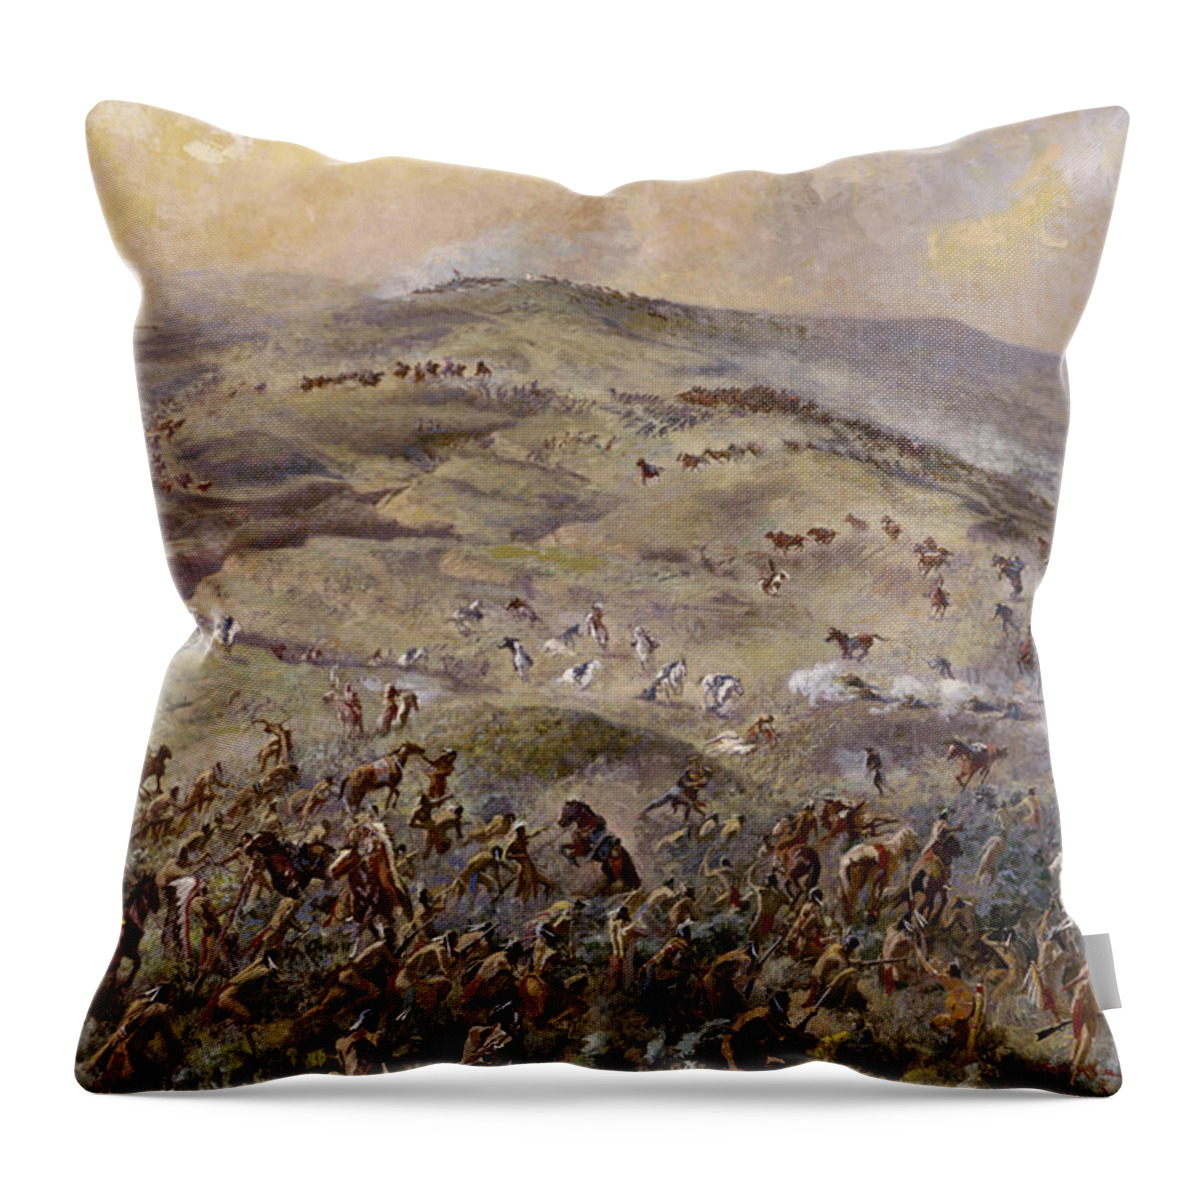 1876 Throw Pillow featuring the painting Little Bighorn, 1876 by Gayle Hoskins